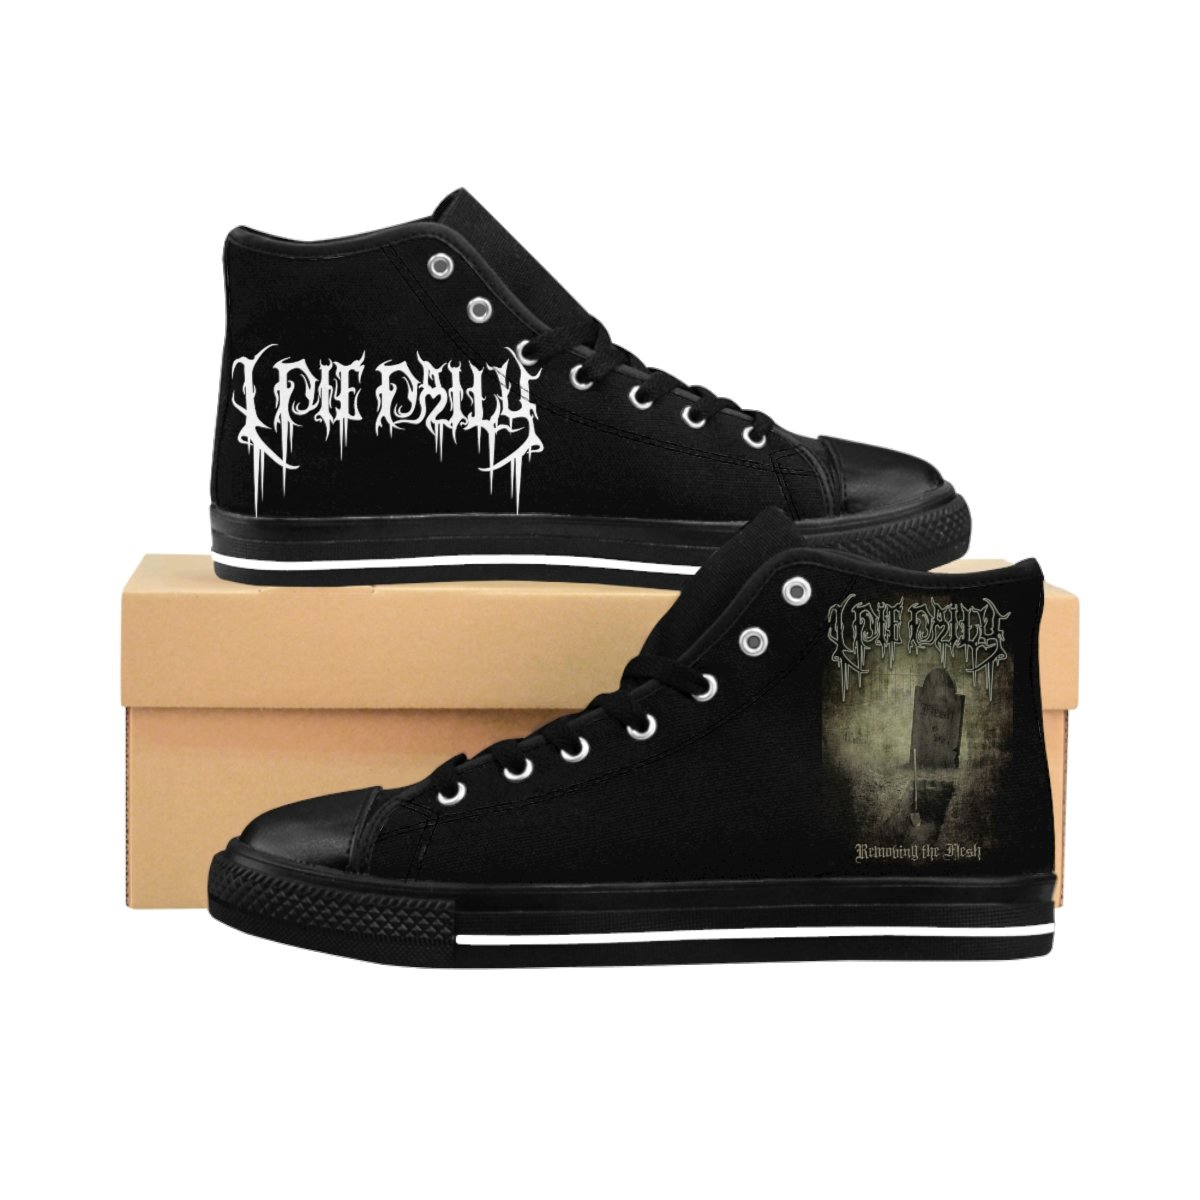 I Die Daily – Removing the Flesh Women’s High-top Sneakers W